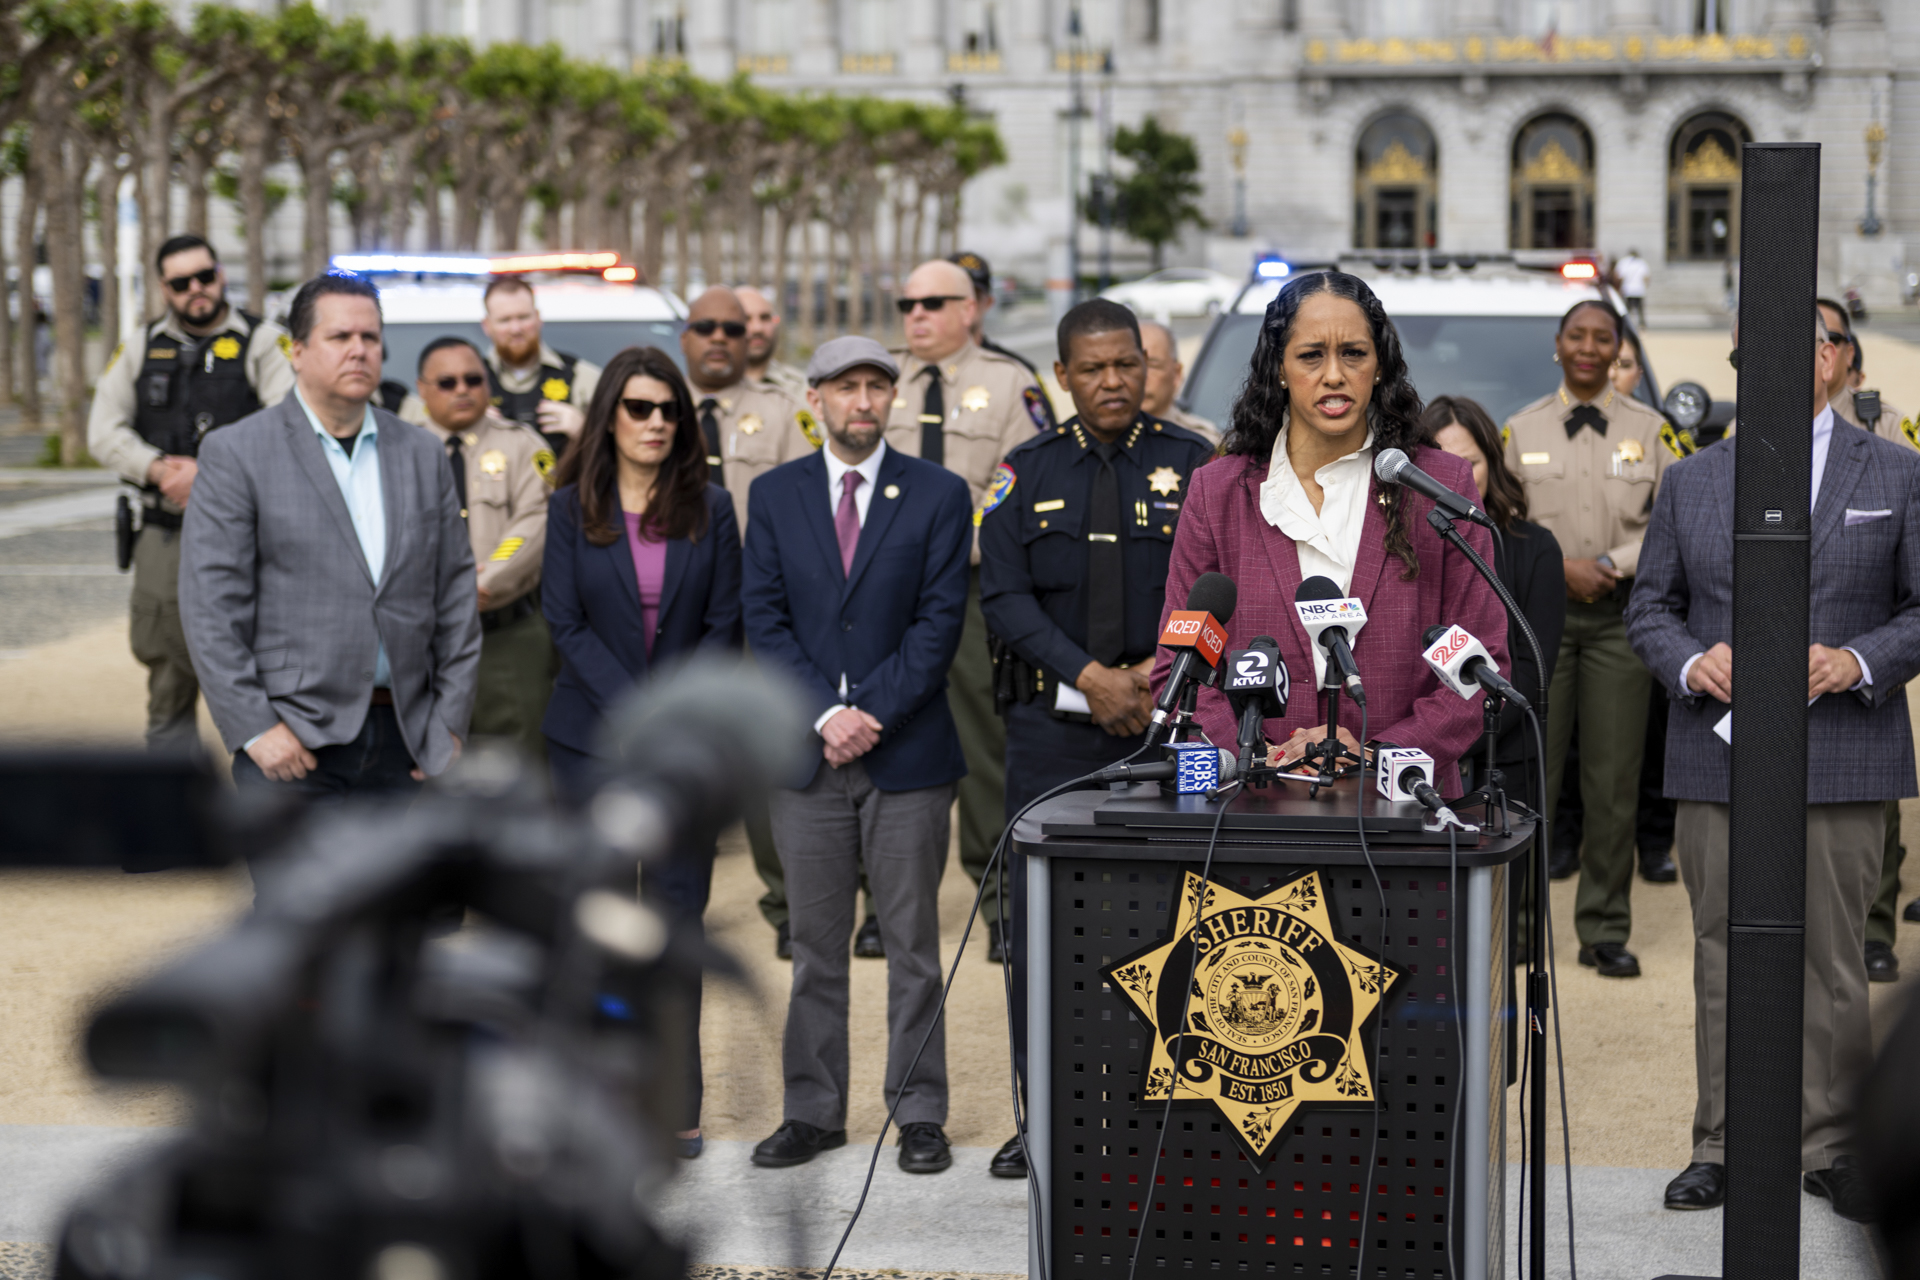 A woman in a purple suit speaks into an array of microphones from an outdoor lectern, flanked by law enforcement officers and others.